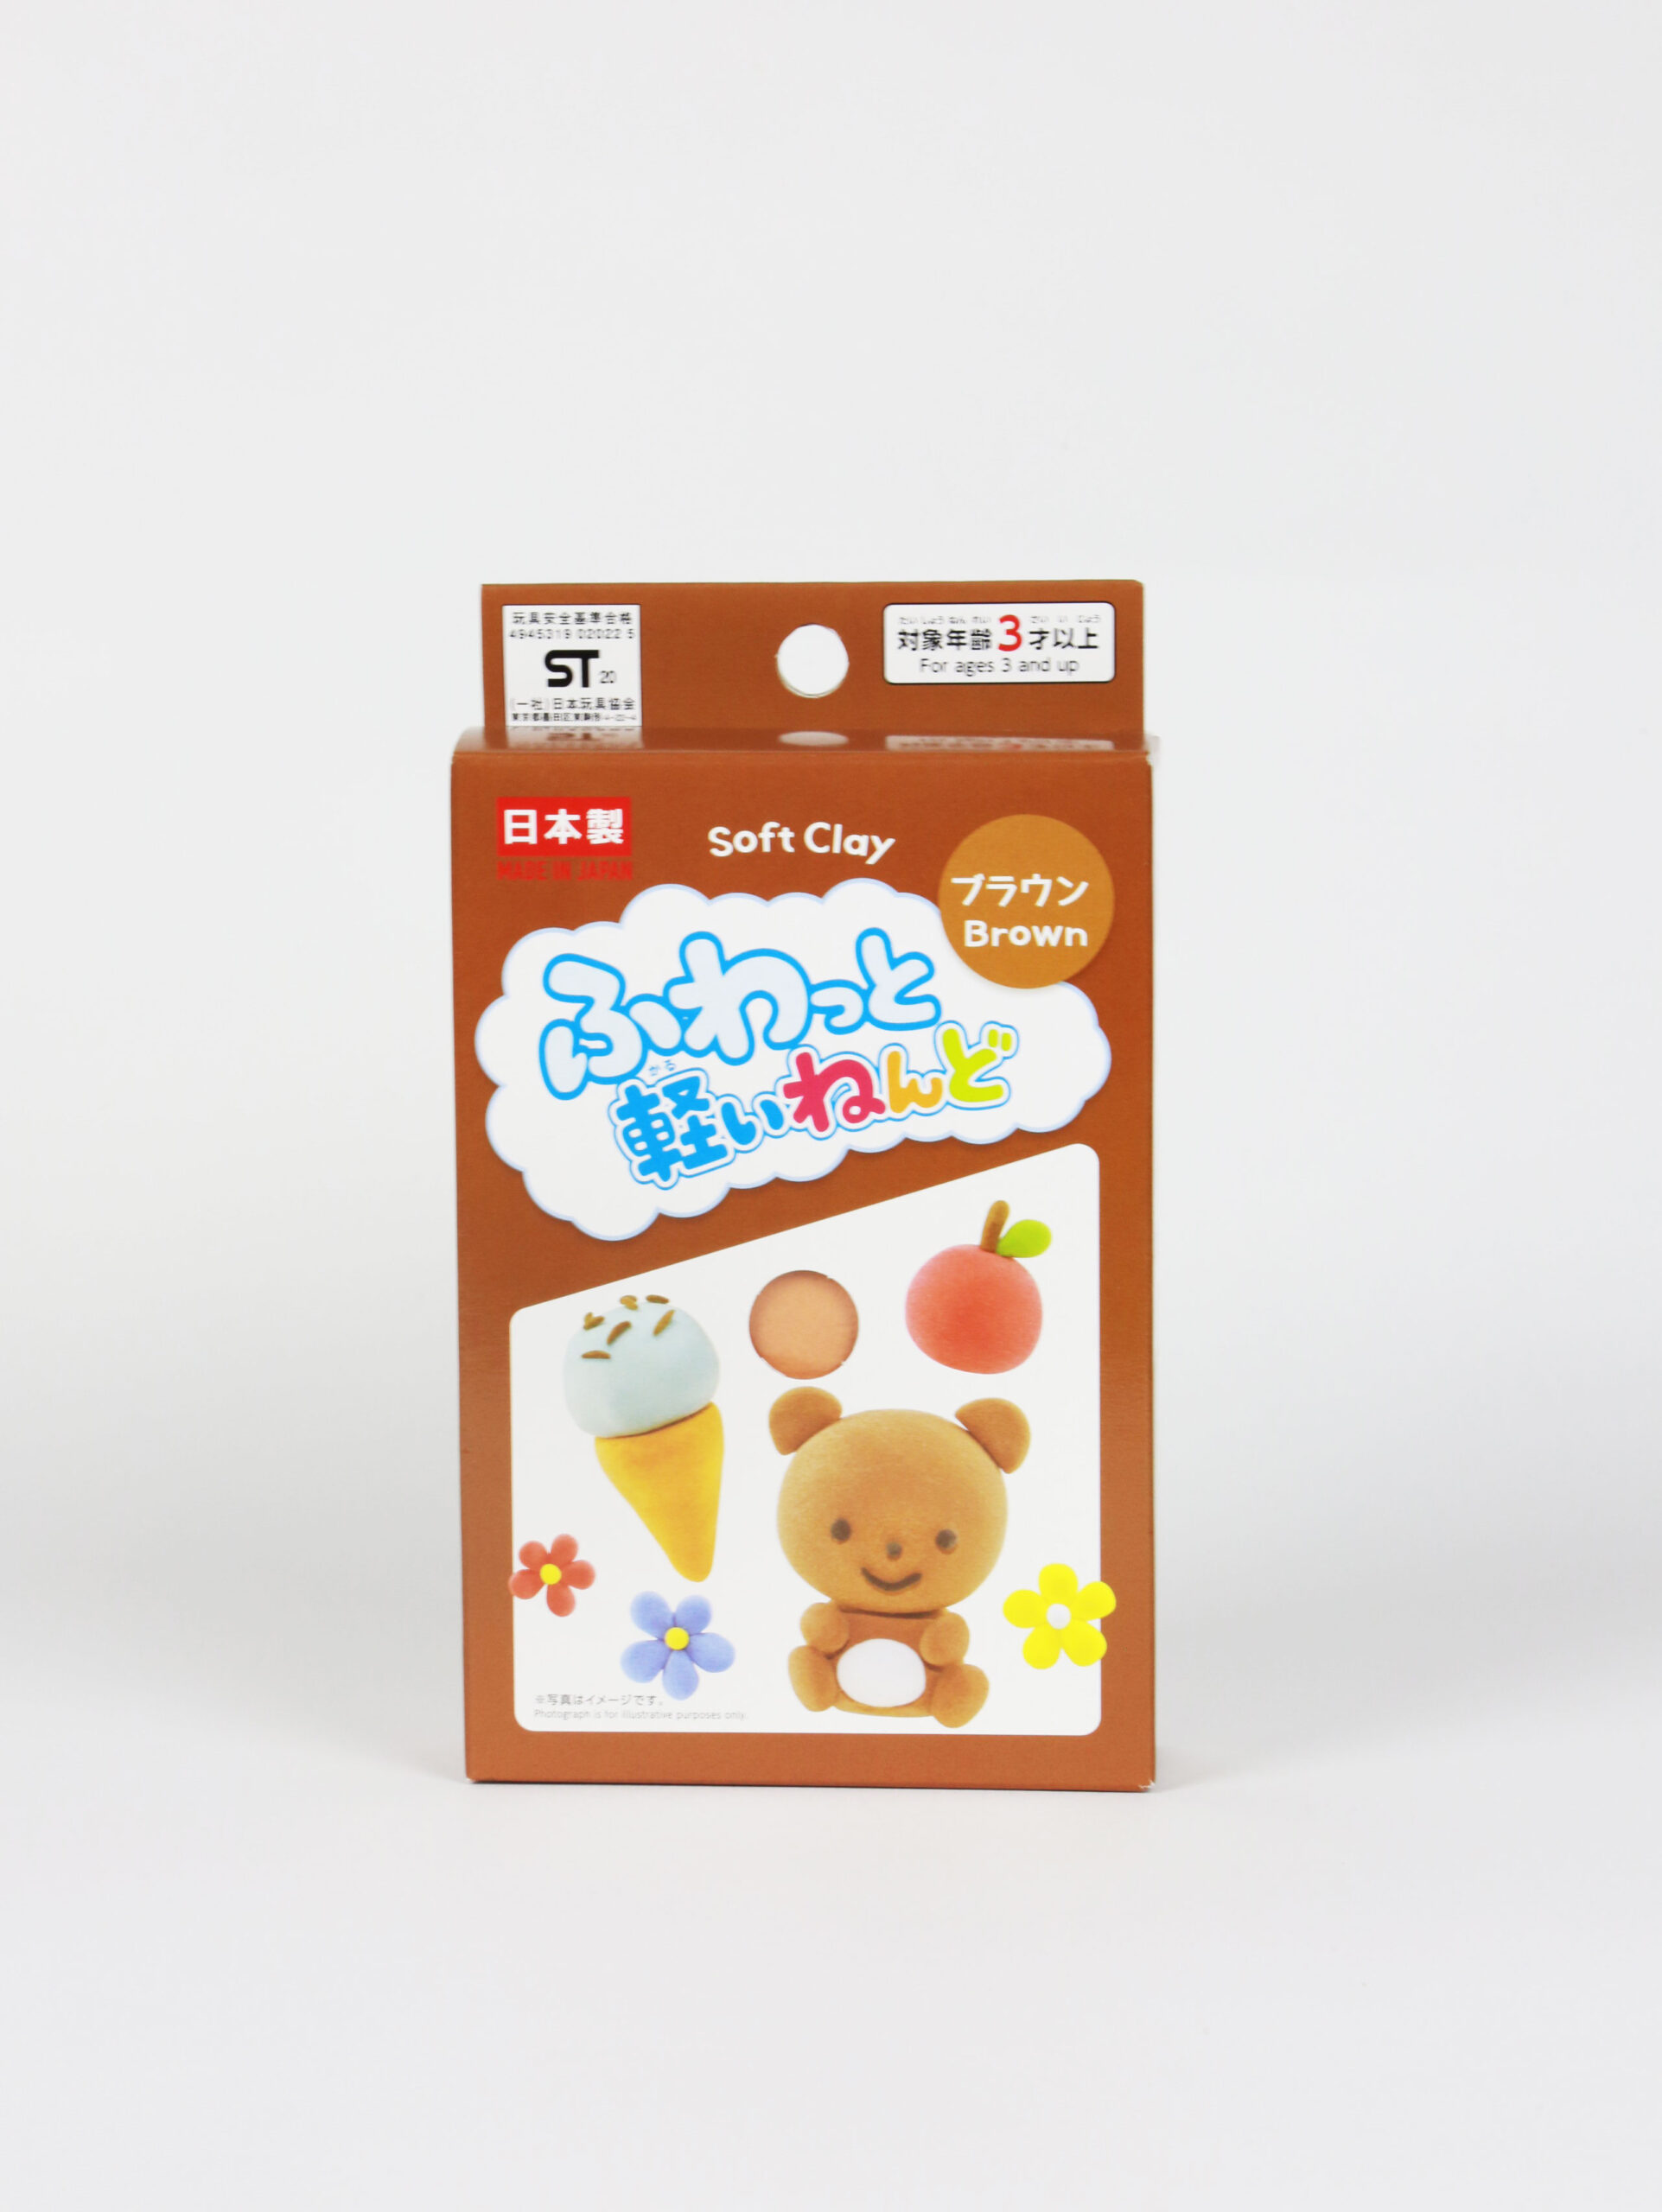 Kawaii Gifts on X: We have the best Daiso soft clay in stock at our Pop-up  Store. All 8 colors available. Our Pop-up is open everyday this week!  #shopkawaiigifts #daiso #clayslime